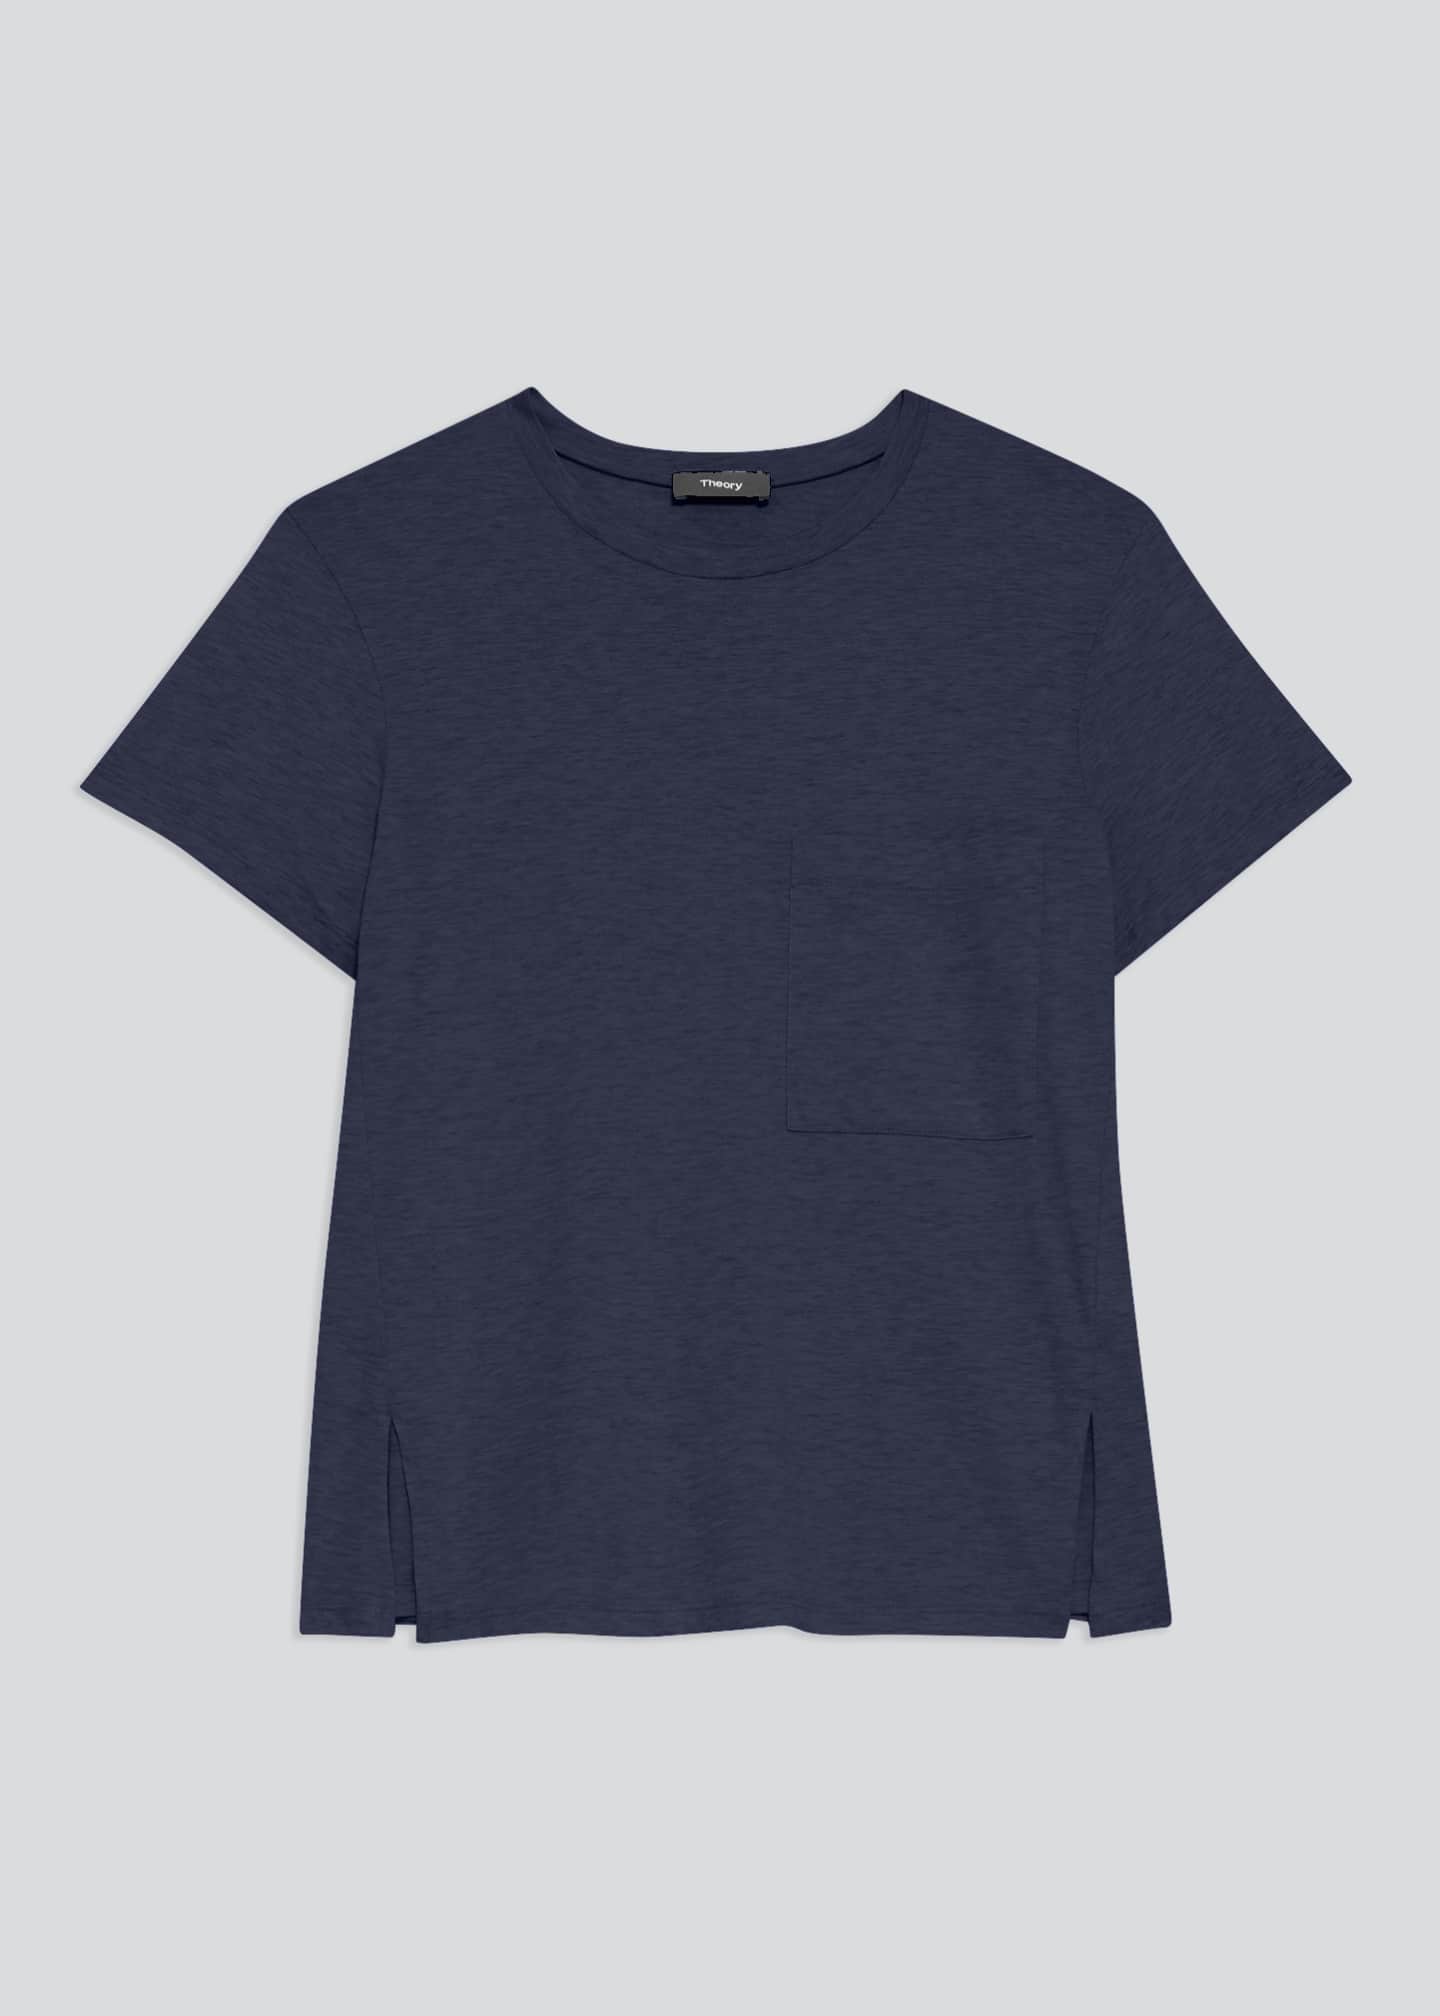 Theory Apex A-Line Tee with Patch Pocket - Bergdorf Goodman